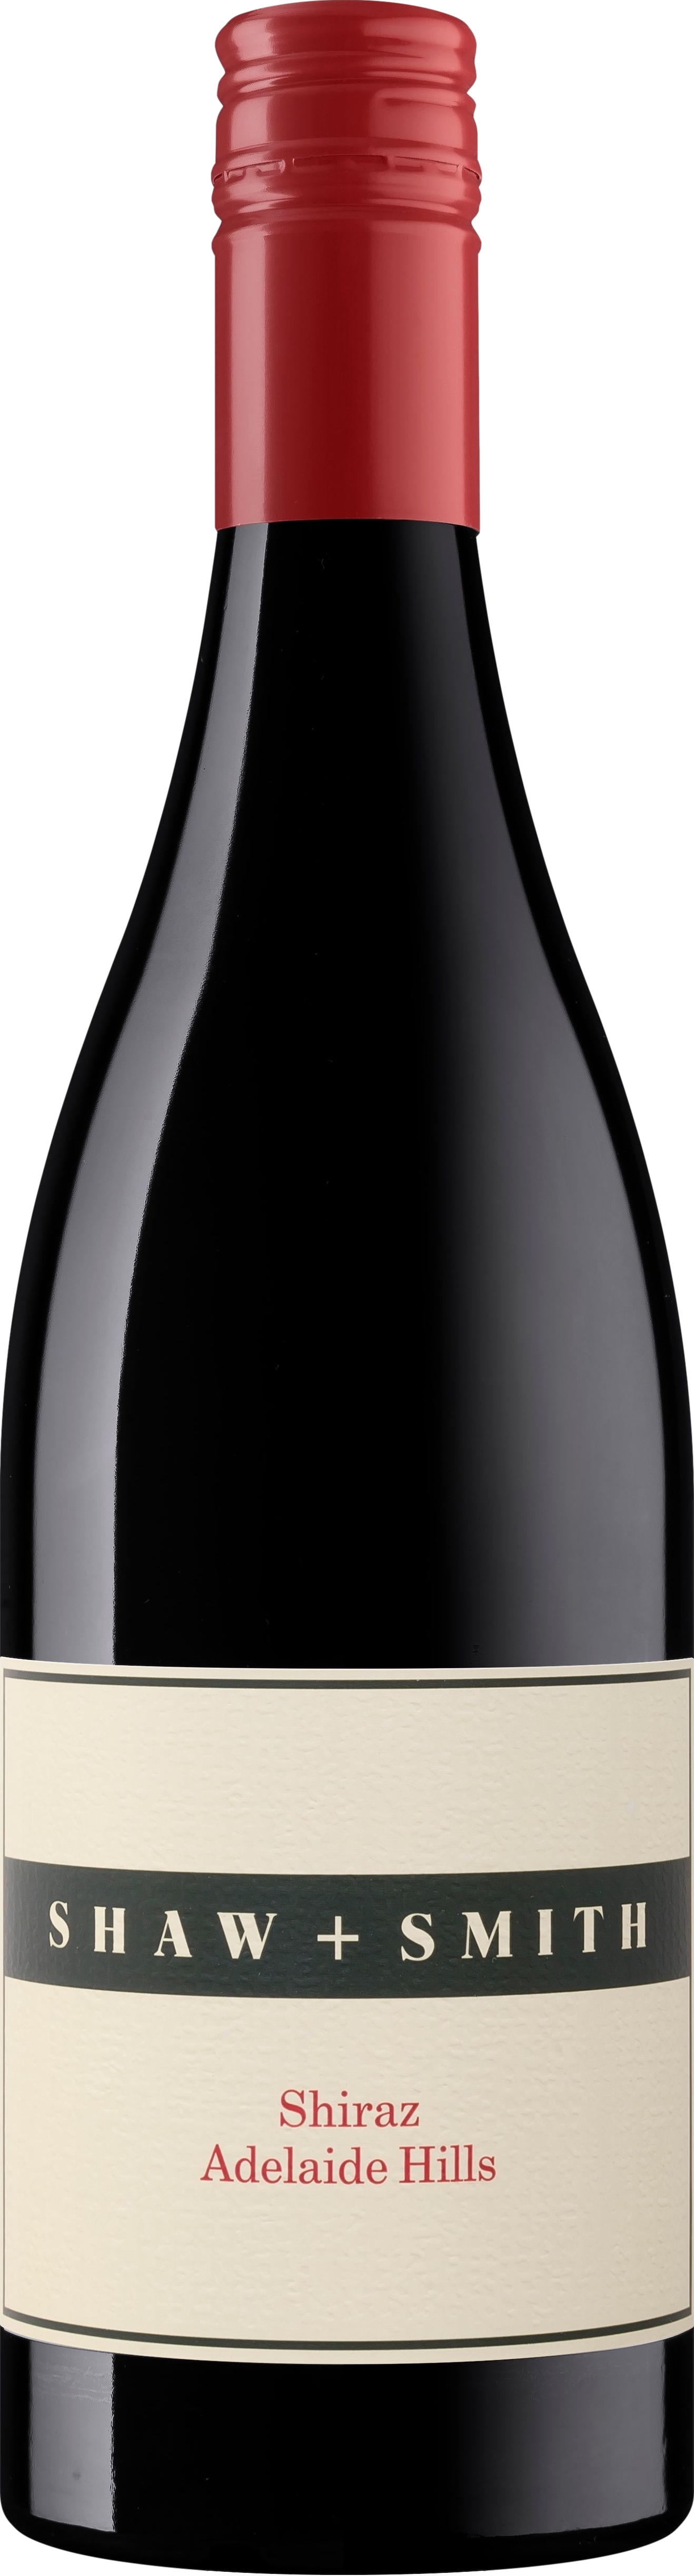 Shaw and Smith Shiraz 2020 Shaw and Smith 8wines DACH